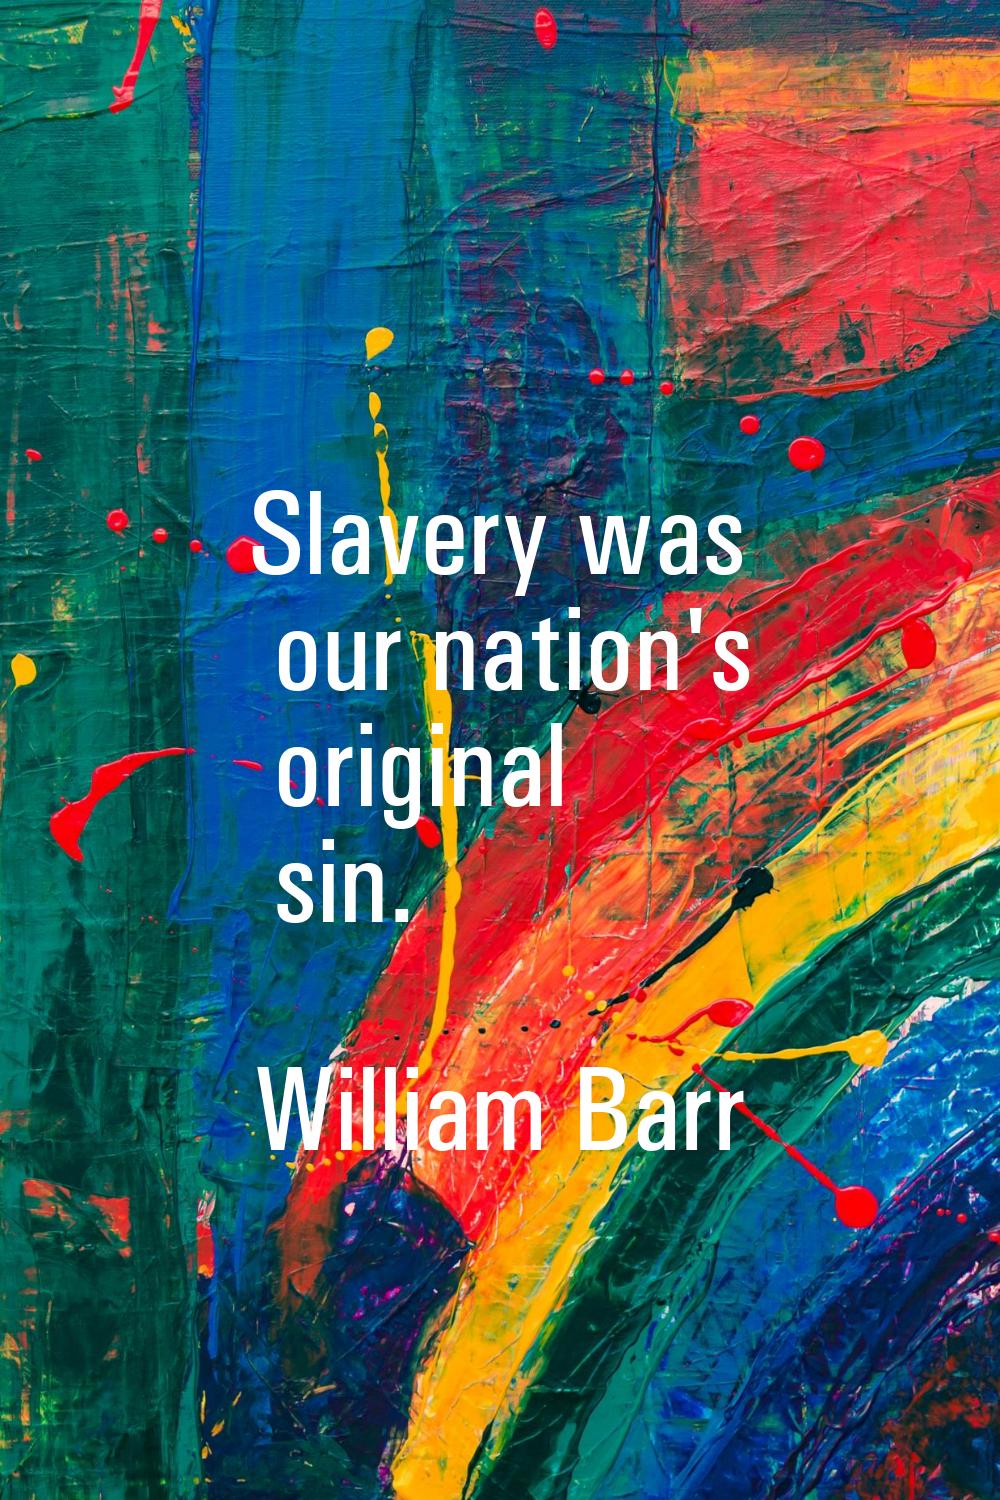 Slavery was our nation's original sin.